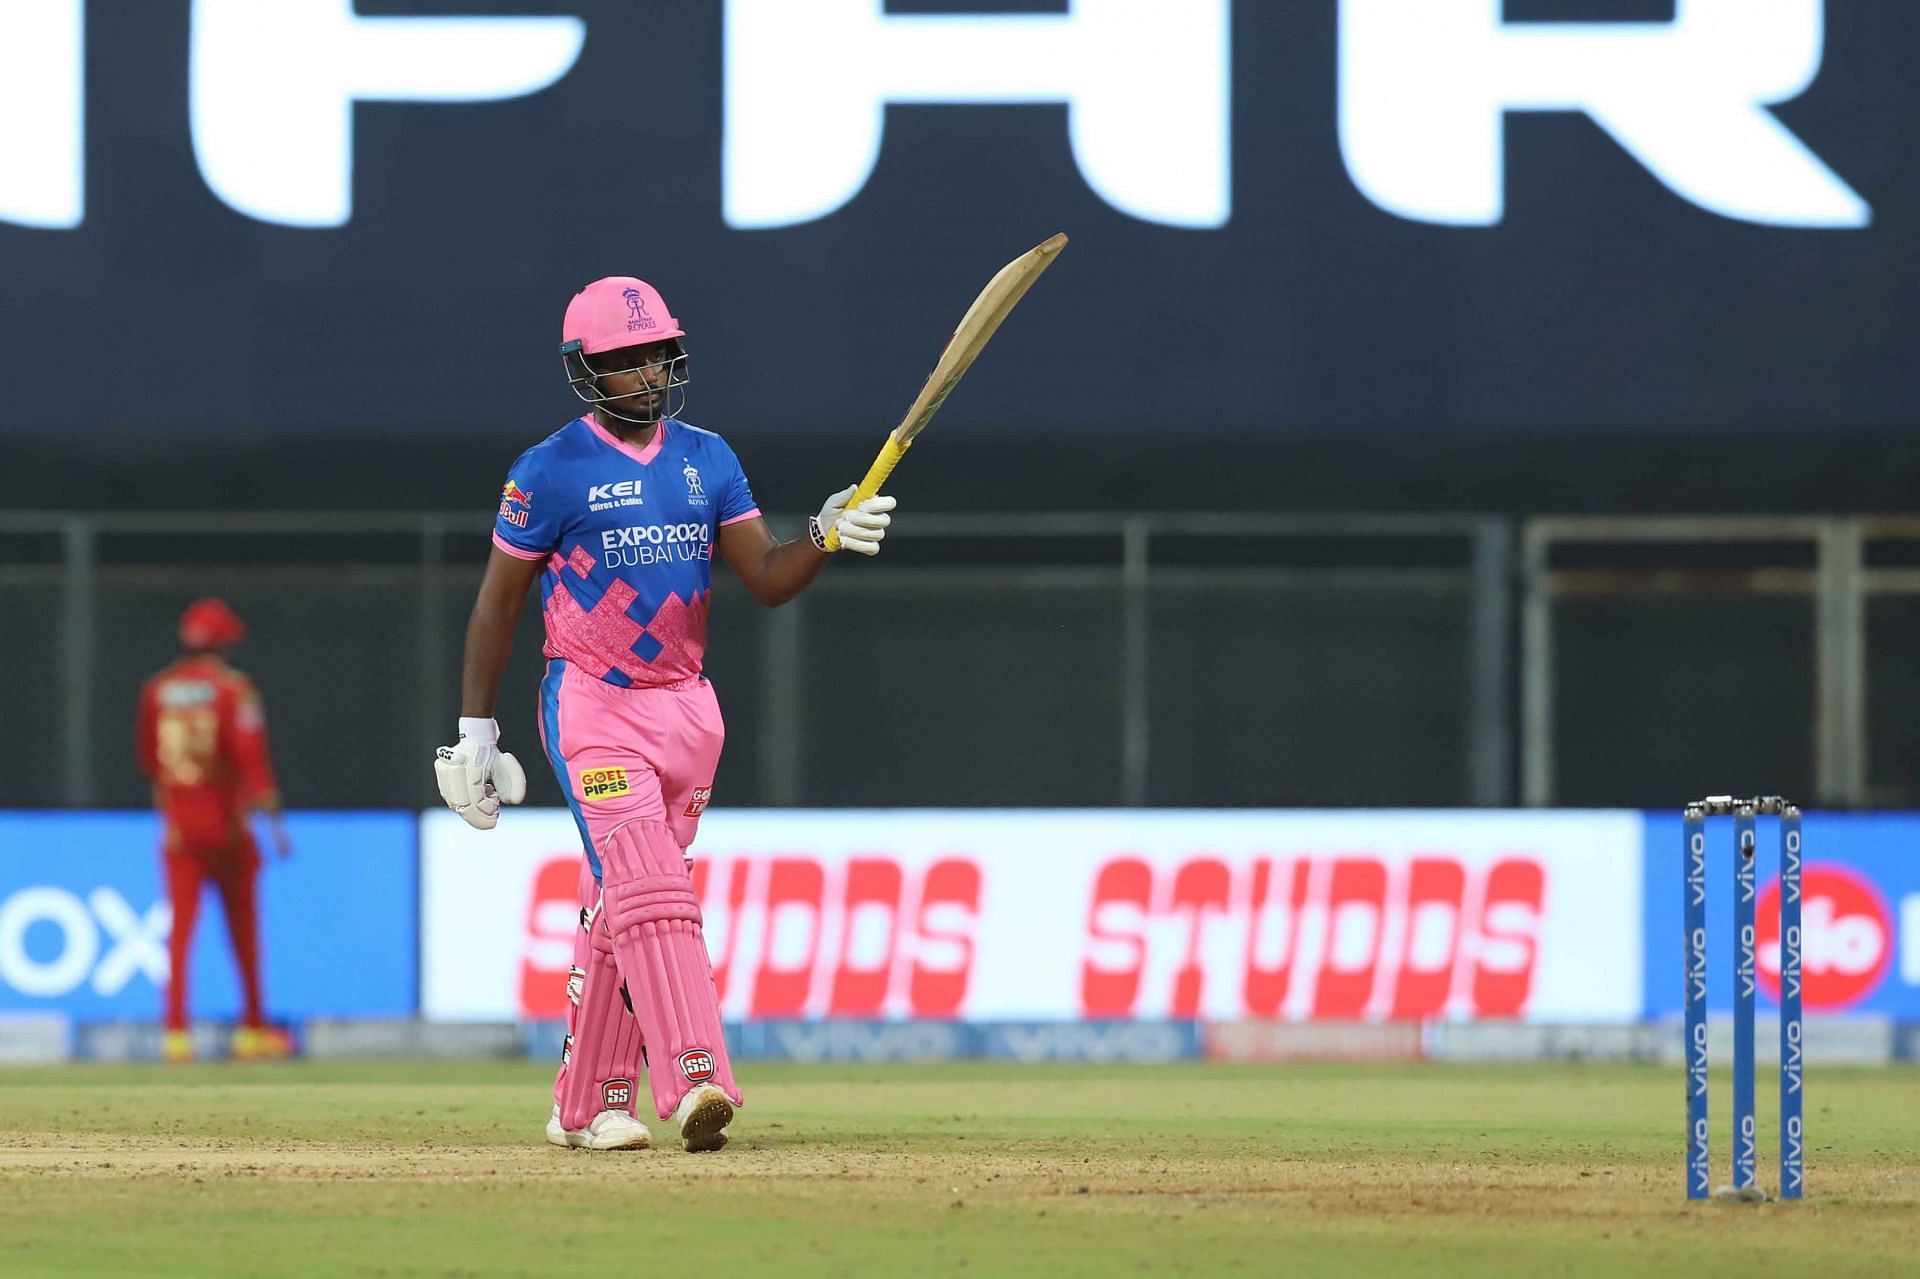 Sanju Samson has been retained by the Rajasthan Royals ahead of IPL Auction 2022 (Image Courtesy: IPLT20.com)